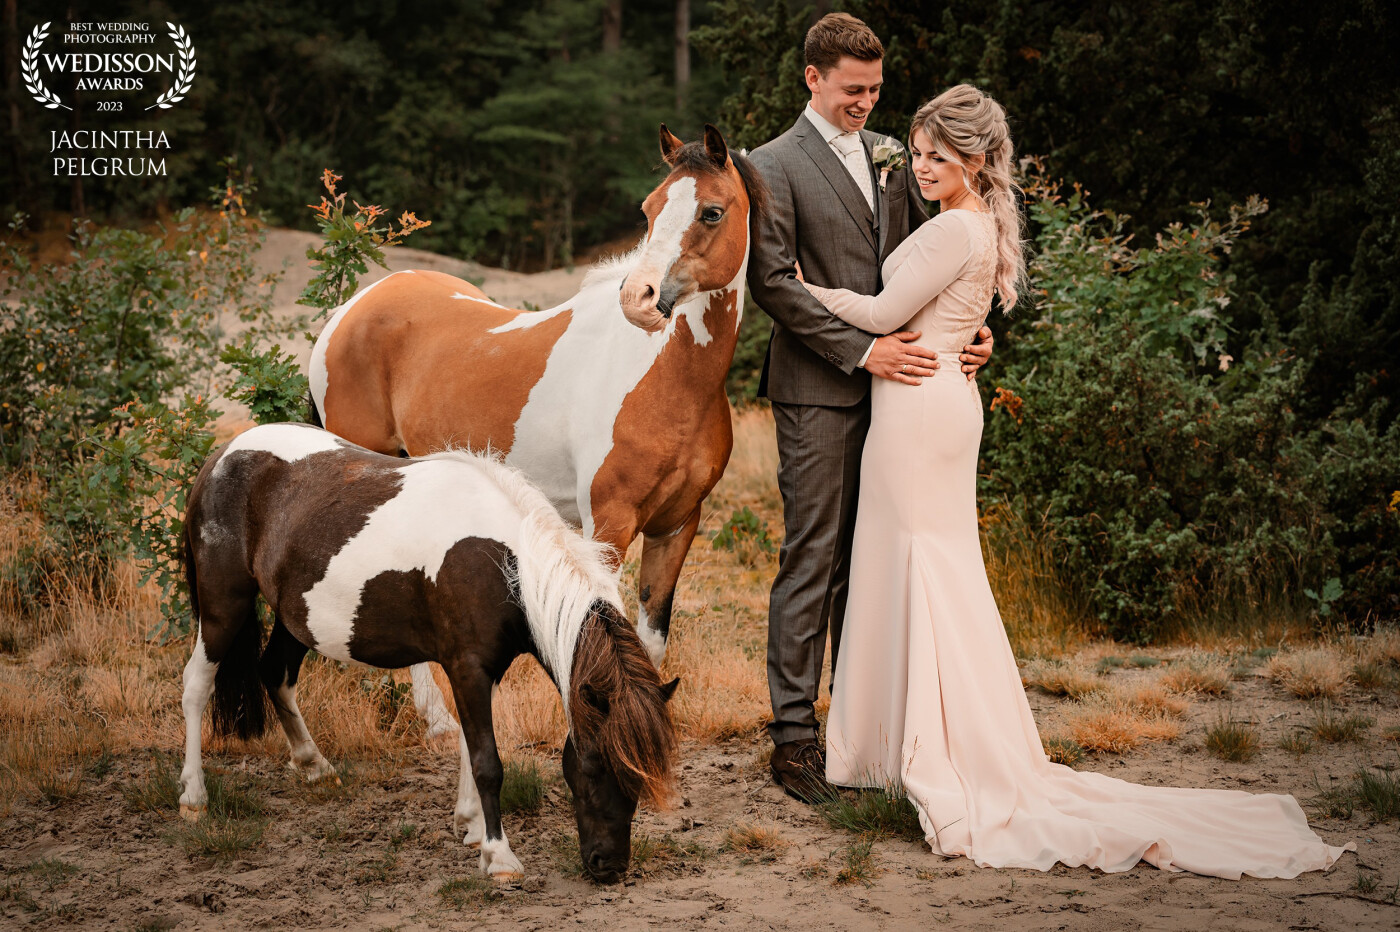 The bridal couple wanted to make pictures with there beautiful ponies.